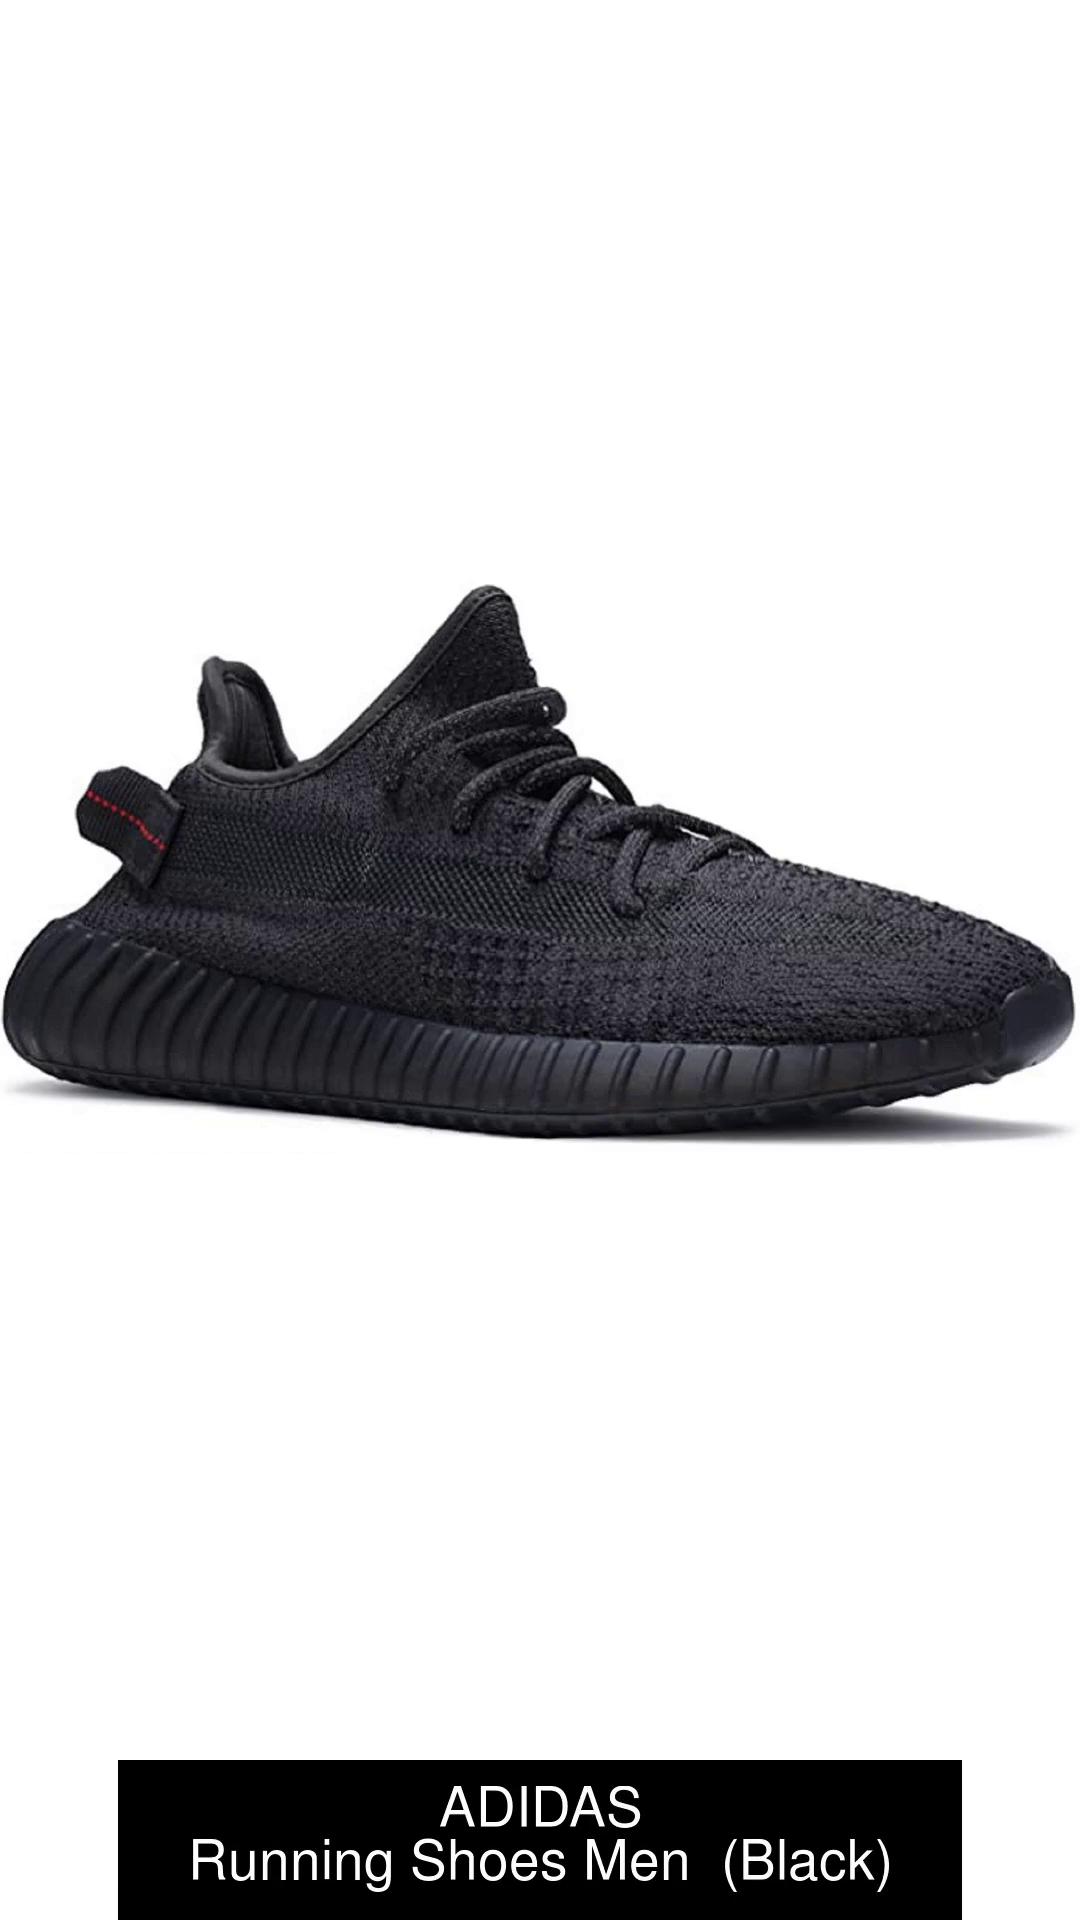 Multicolor Casual Wear Adidas Yeezy Boost 350 V2 Tail Men's Sneakers  Running shoes